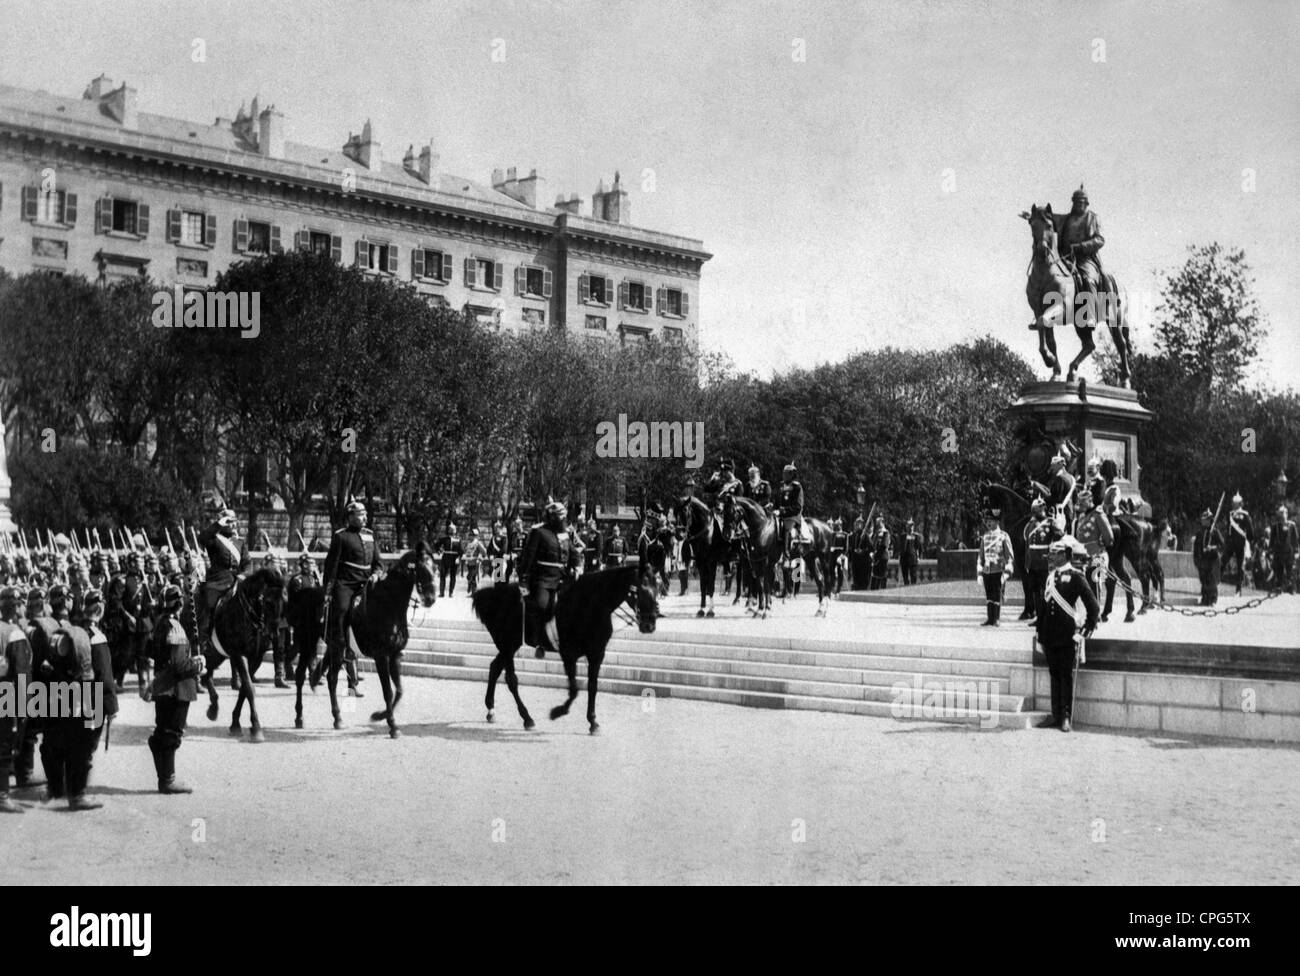 military, Germany, parade in Berlin, circa 1910, Emperor Wilhelm II taking the salute, Additional-Rights-Clearences-Not Available Stock Photo